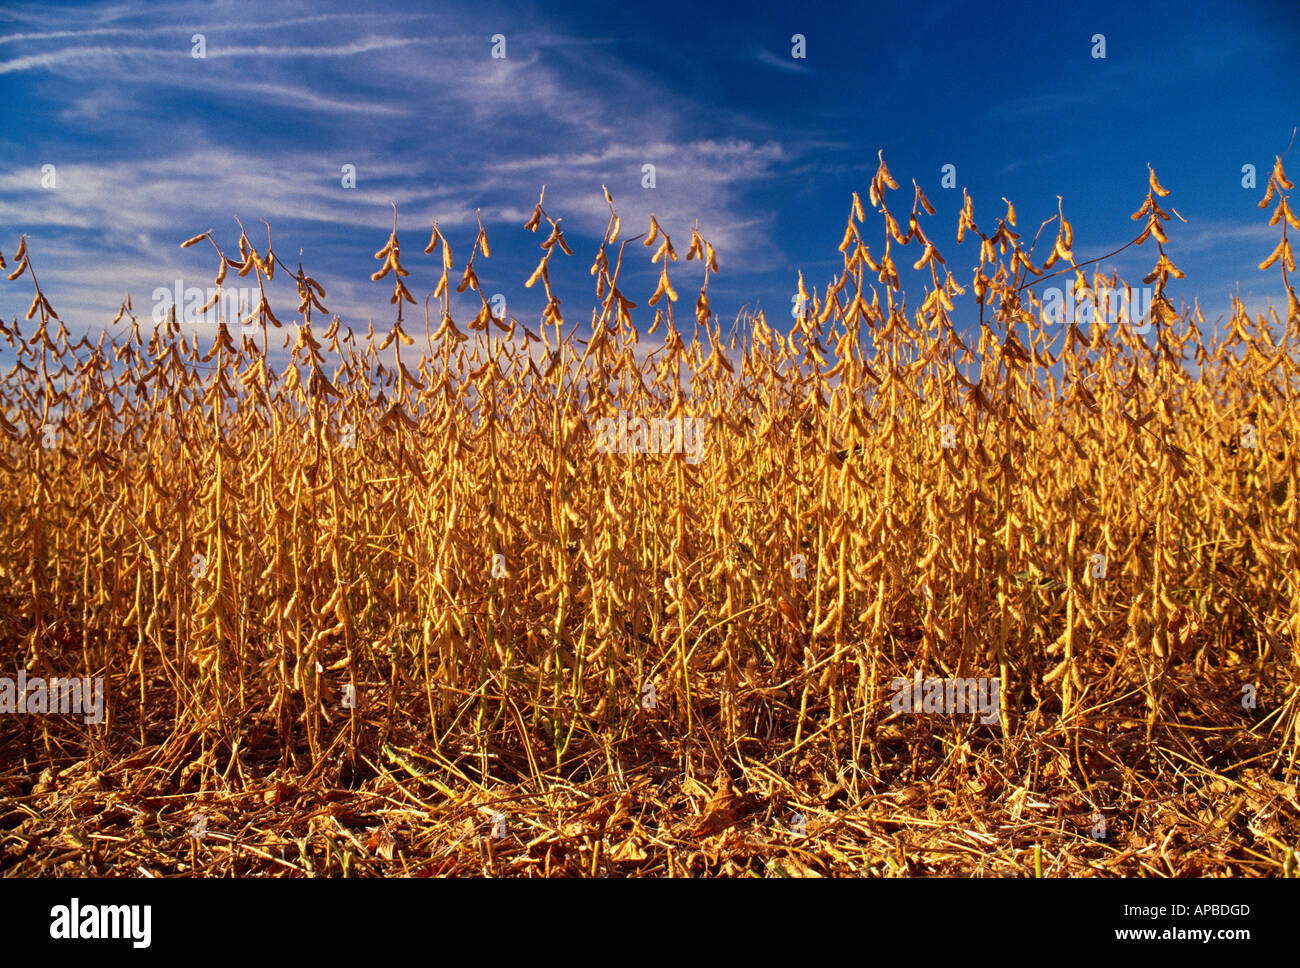 Agriculture - Sideview of a stand of mature soybeans ready for harvest / Illinois, USA. Stock Photo